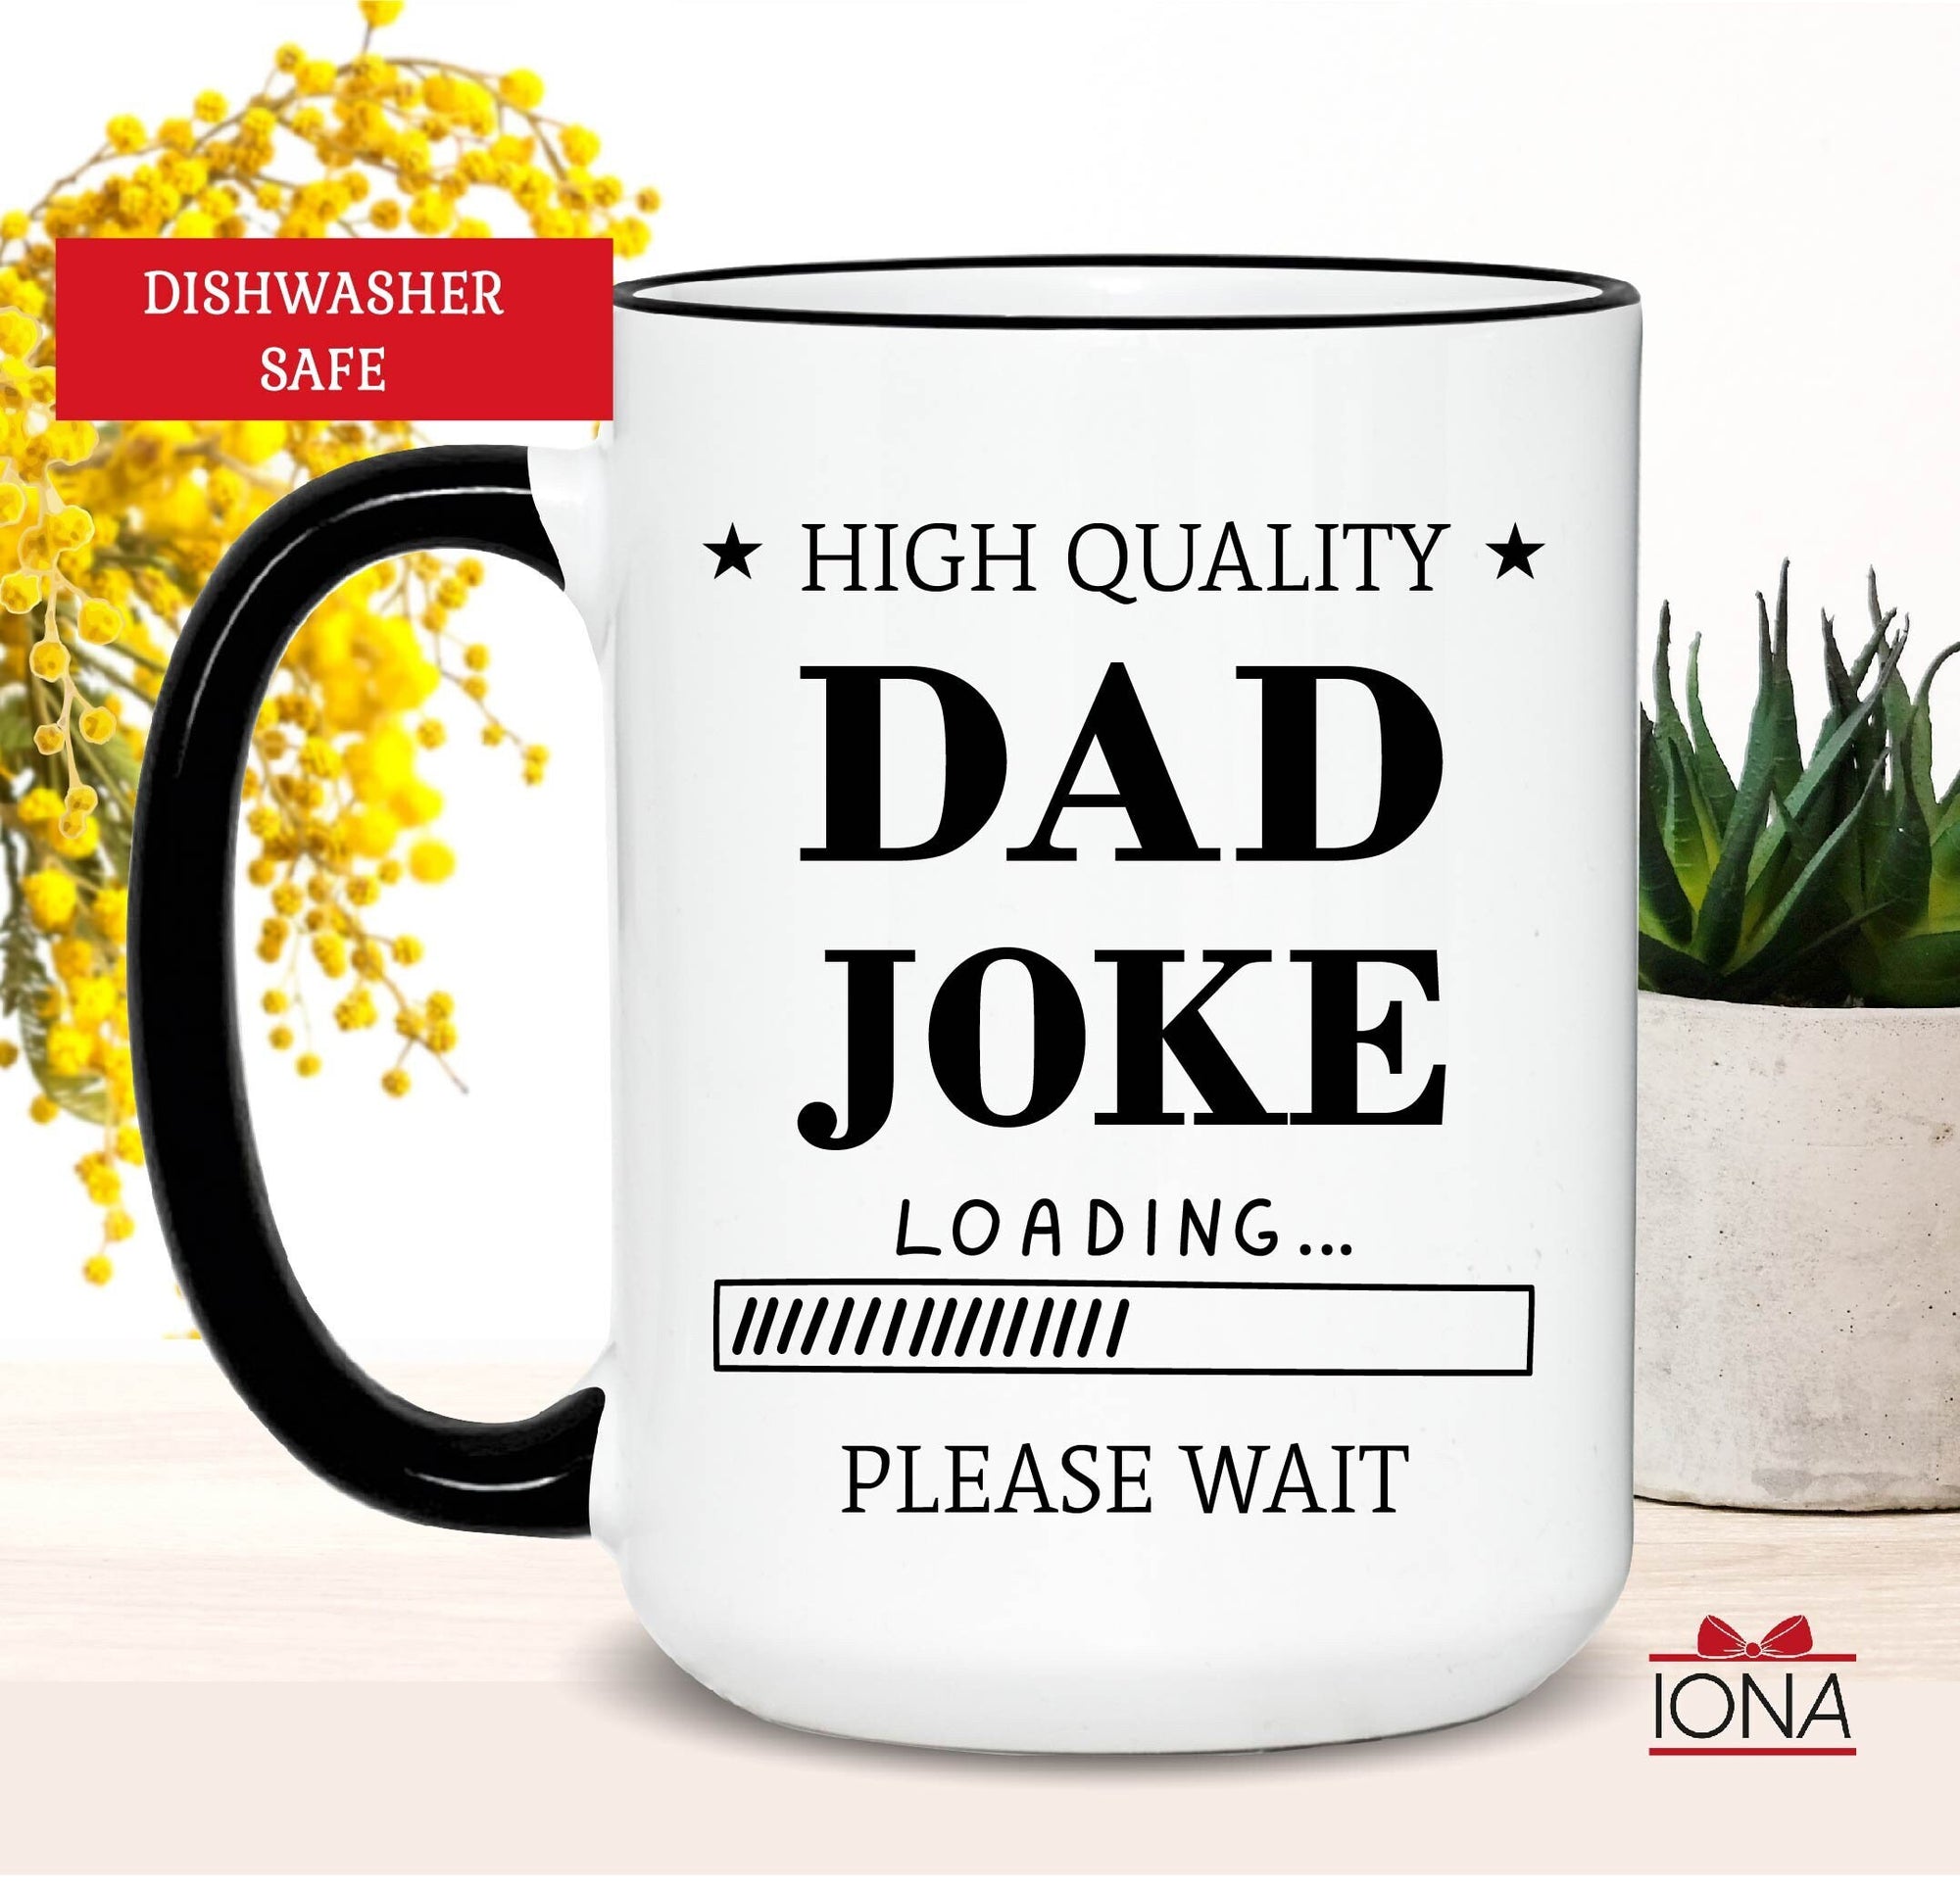 Funny Dad Joke Coffee Mug, Geek Father's Day Gift, Dad Birthday Gift from Daughter, Son, High Quality Dad Joke Loading Tea Cup for Father